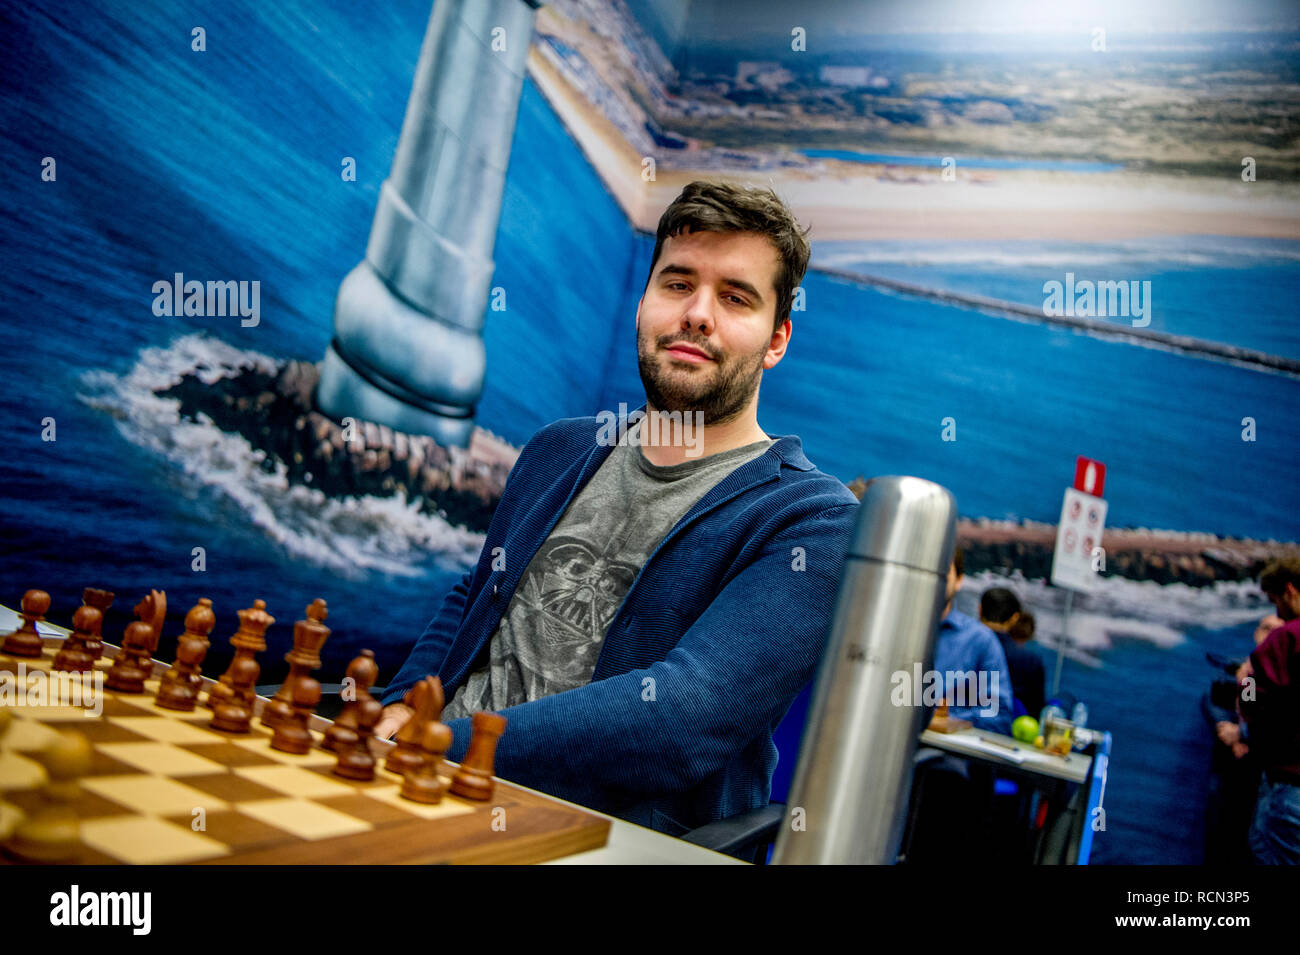 Tata steel chess hi-res stock photography and images - Alamy